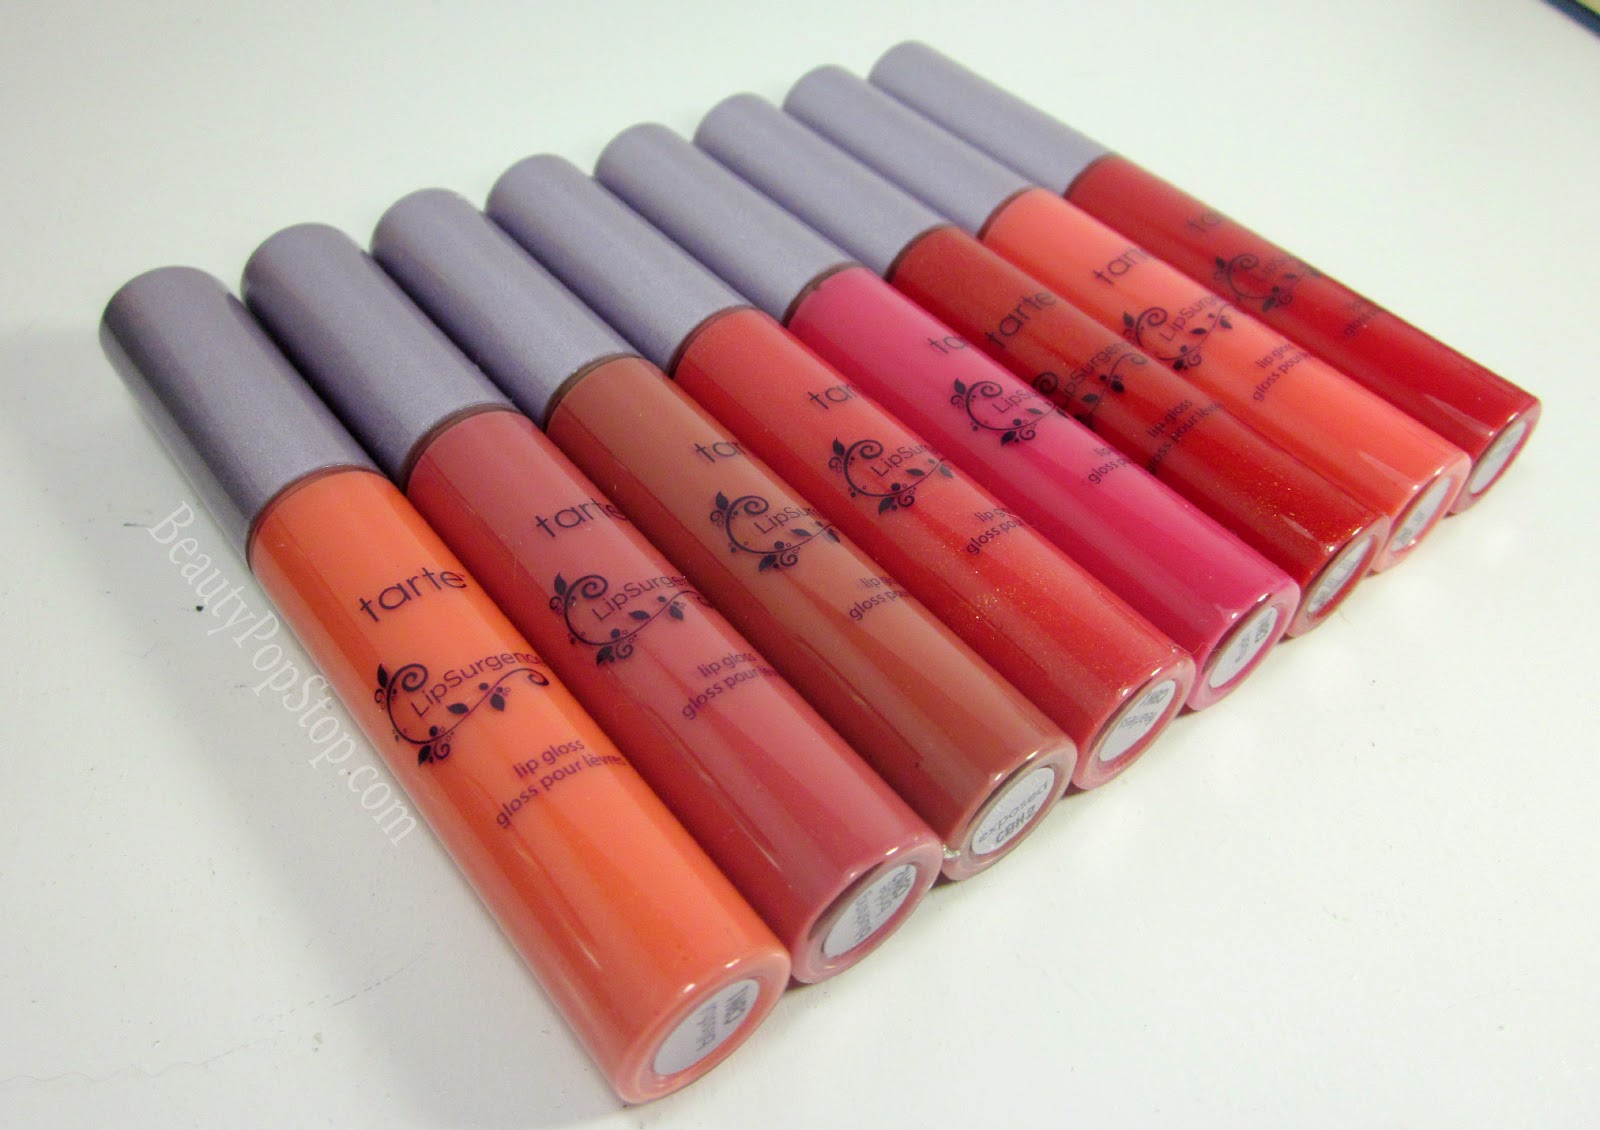 tarte cosmetics lipsurgence lip gloss swatches and review spring 2014